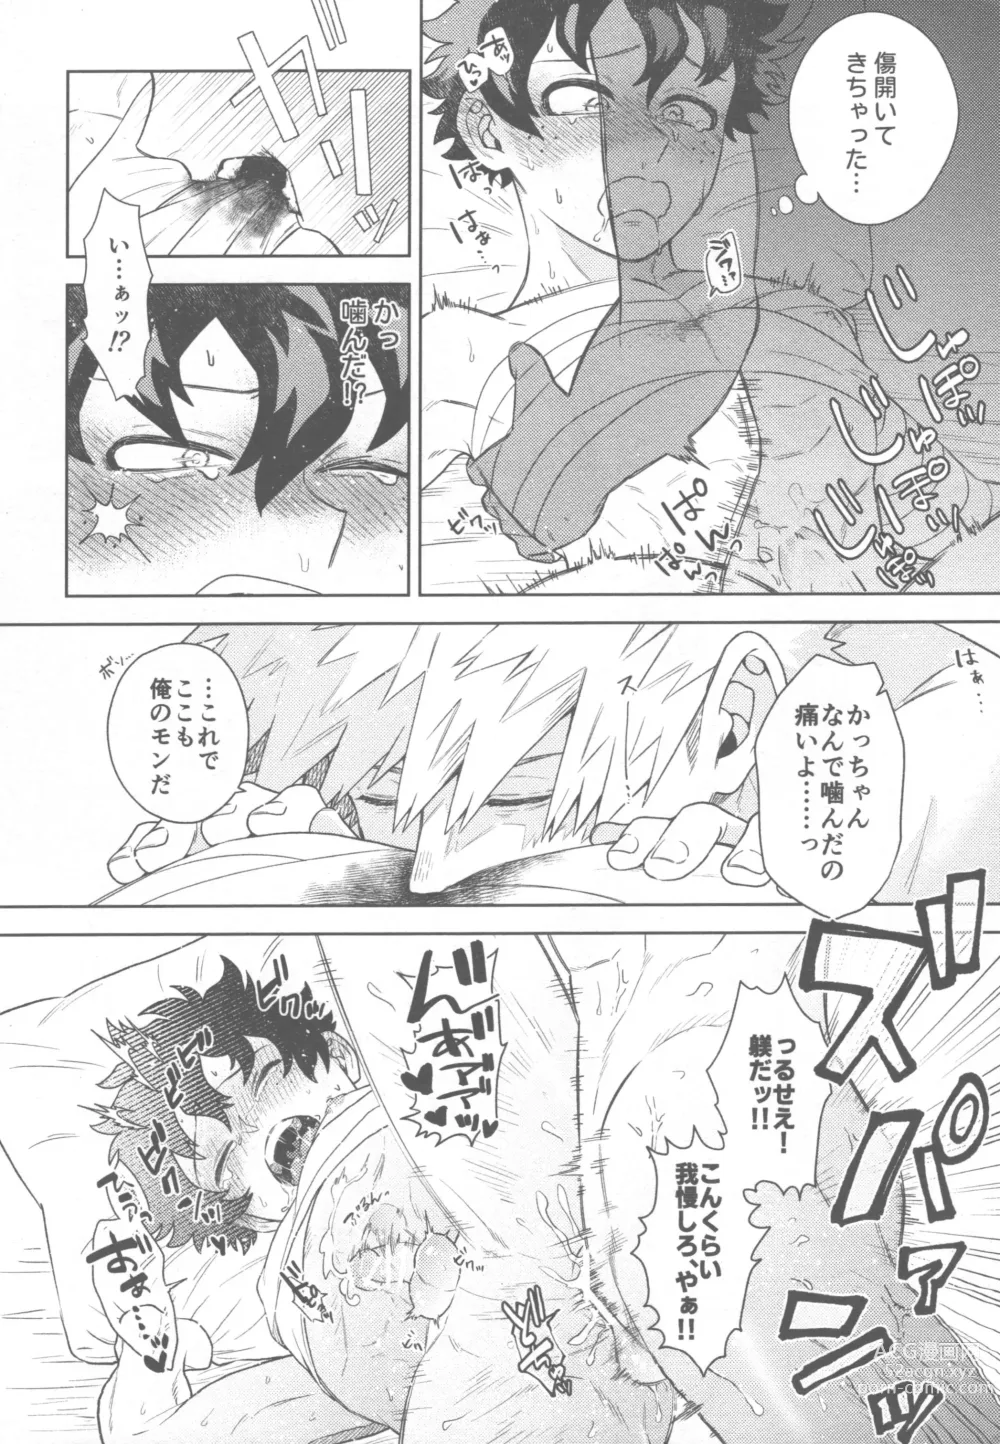 Page 16 of doujinshi SNOW TALE